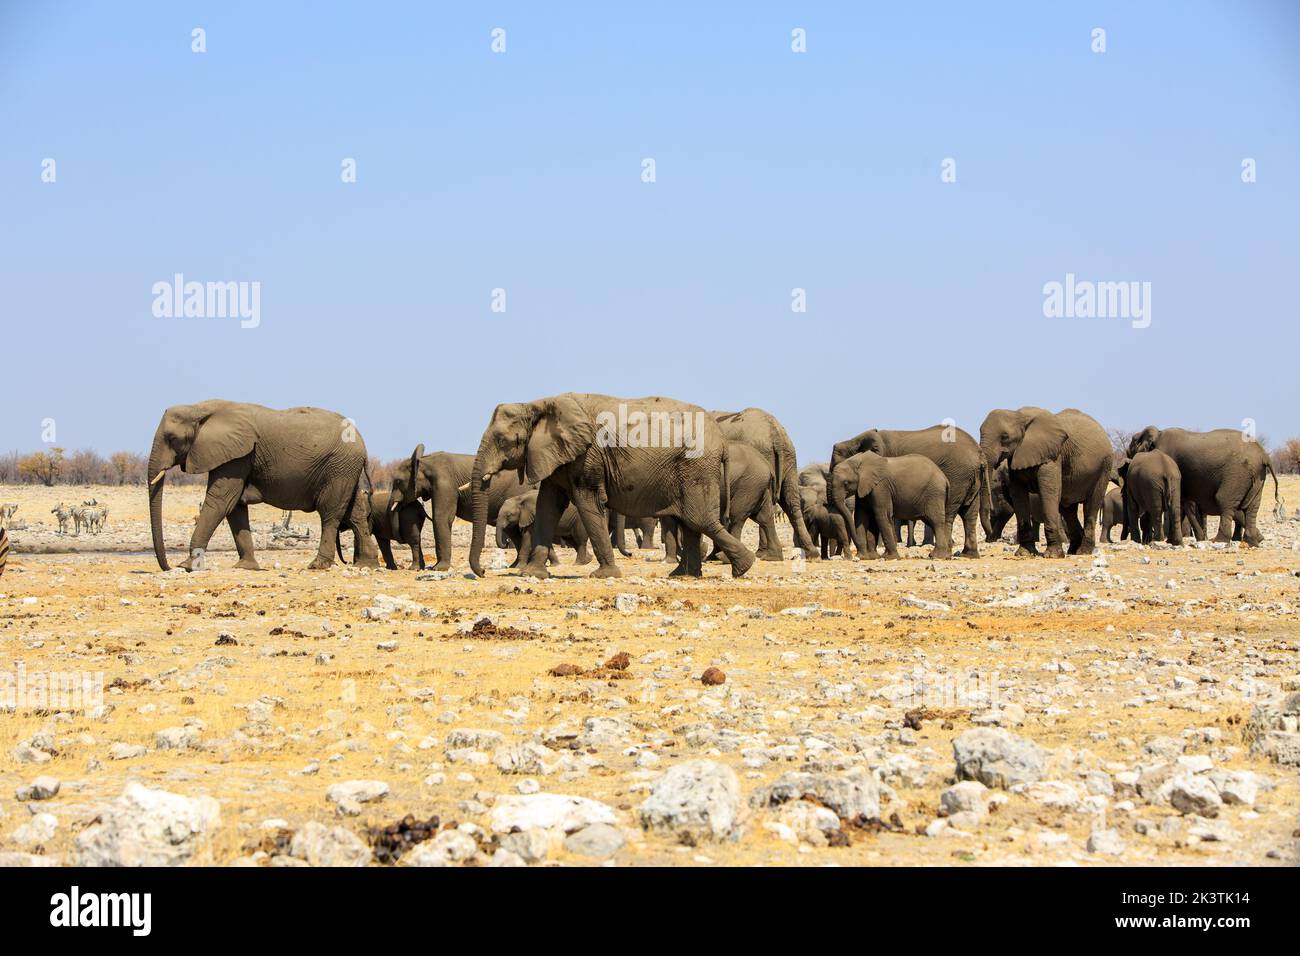 A large herd of African Elephants walking through the dry savannah in Rietfontein with a bright clear blue sky, in Etosha National Park, Namibia Stock Photo